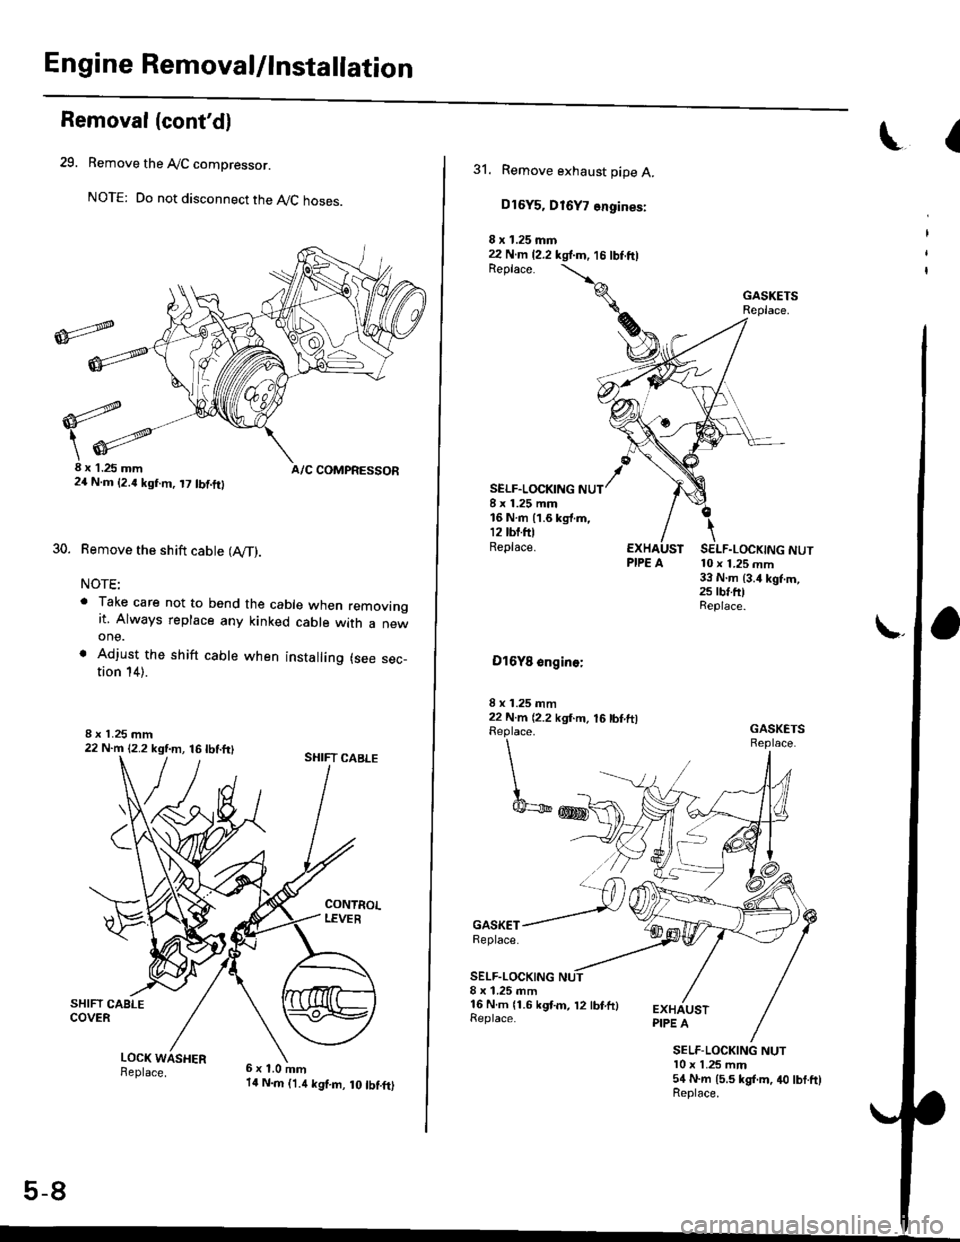 HONDA CIVIC 1998 6.G Workshop Manual Engine Removal/lnstallation
Removal(contdl
29. Remove the AyC compressor.
NOTE: Do not disconnect the AyC hoses.
30.
8x 1.25 mm A/C COMPRESSOR24 N.m (2.{ kgf.m, t7 tbtft}
Remove the shift cable (IV